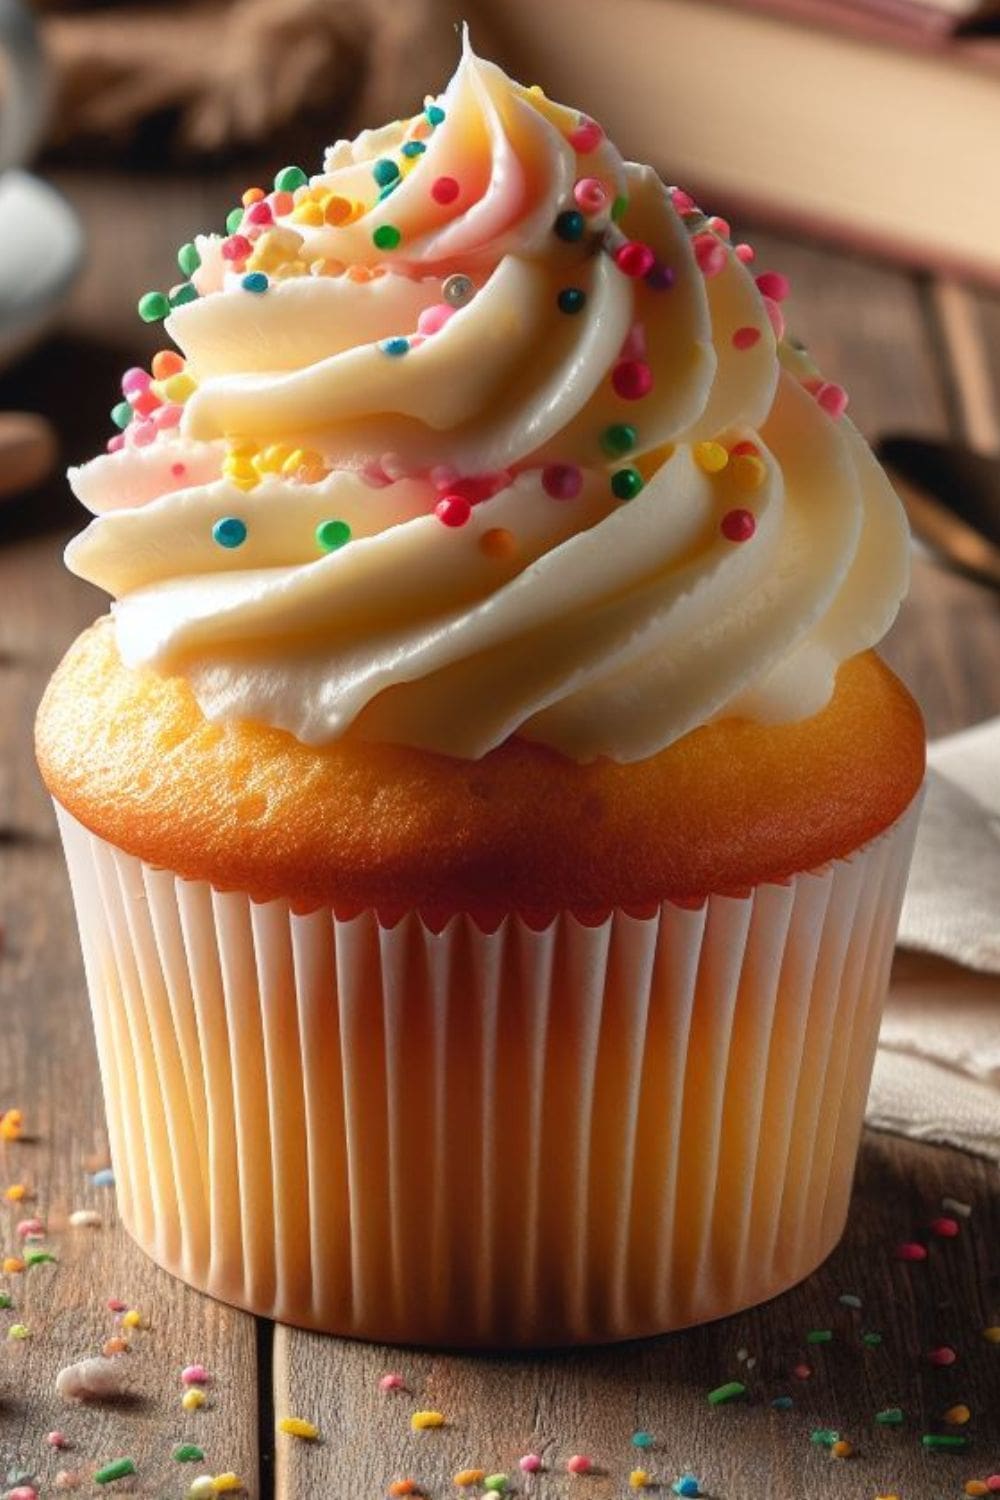 A close-up photo of a cupcake with vanilla frosting and sprinkles on a wooden table.